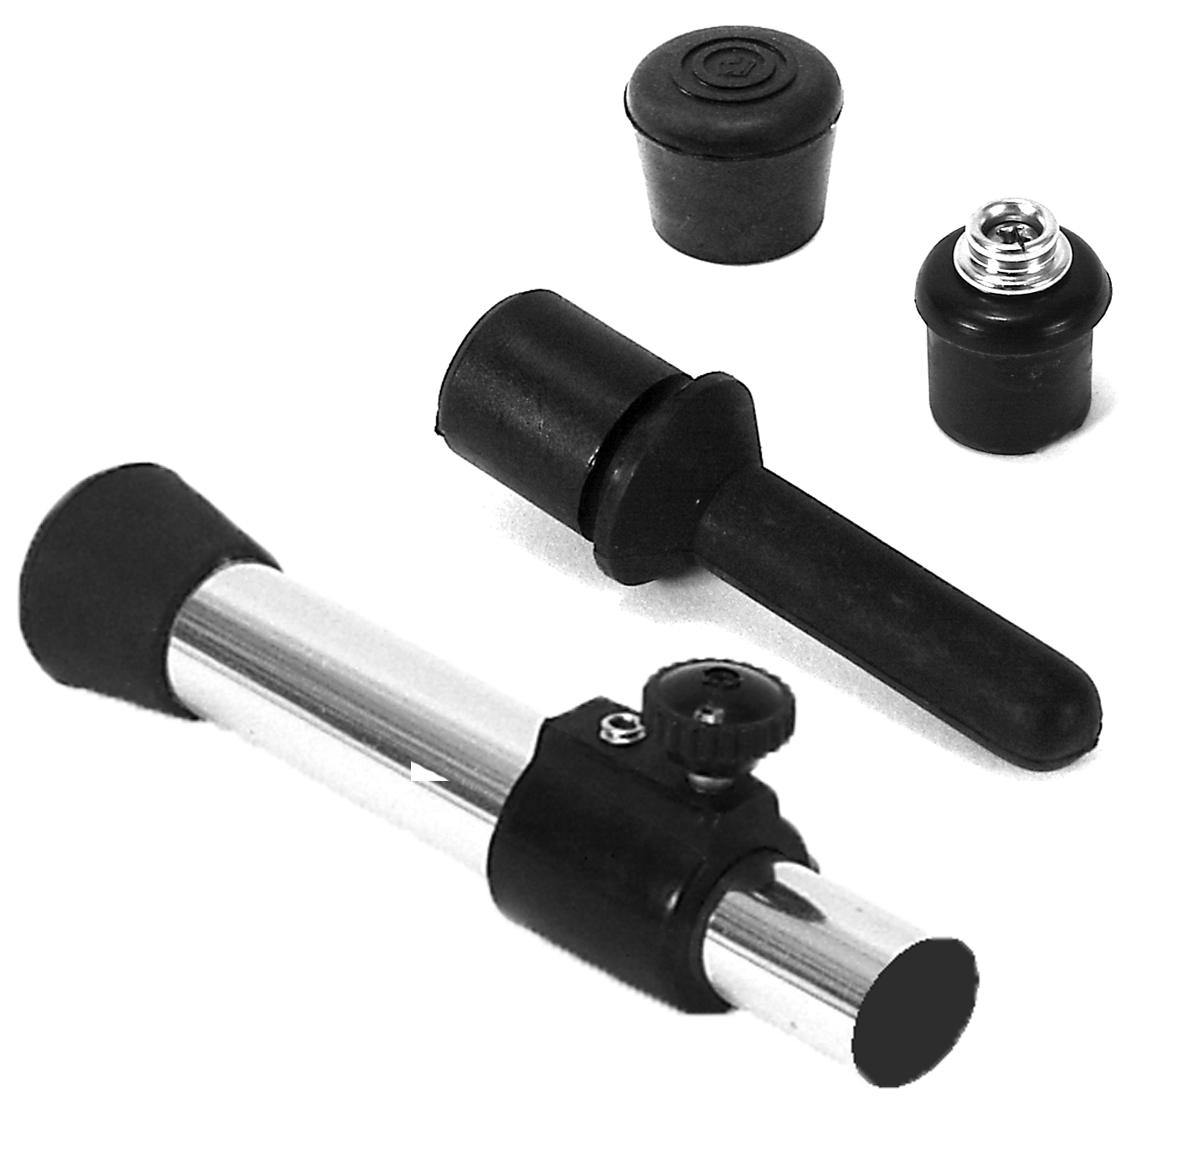 Adjustable Support Poles – 3/4″- 7/8″ – With 3 End Fittings 7619, 7621 and 7622